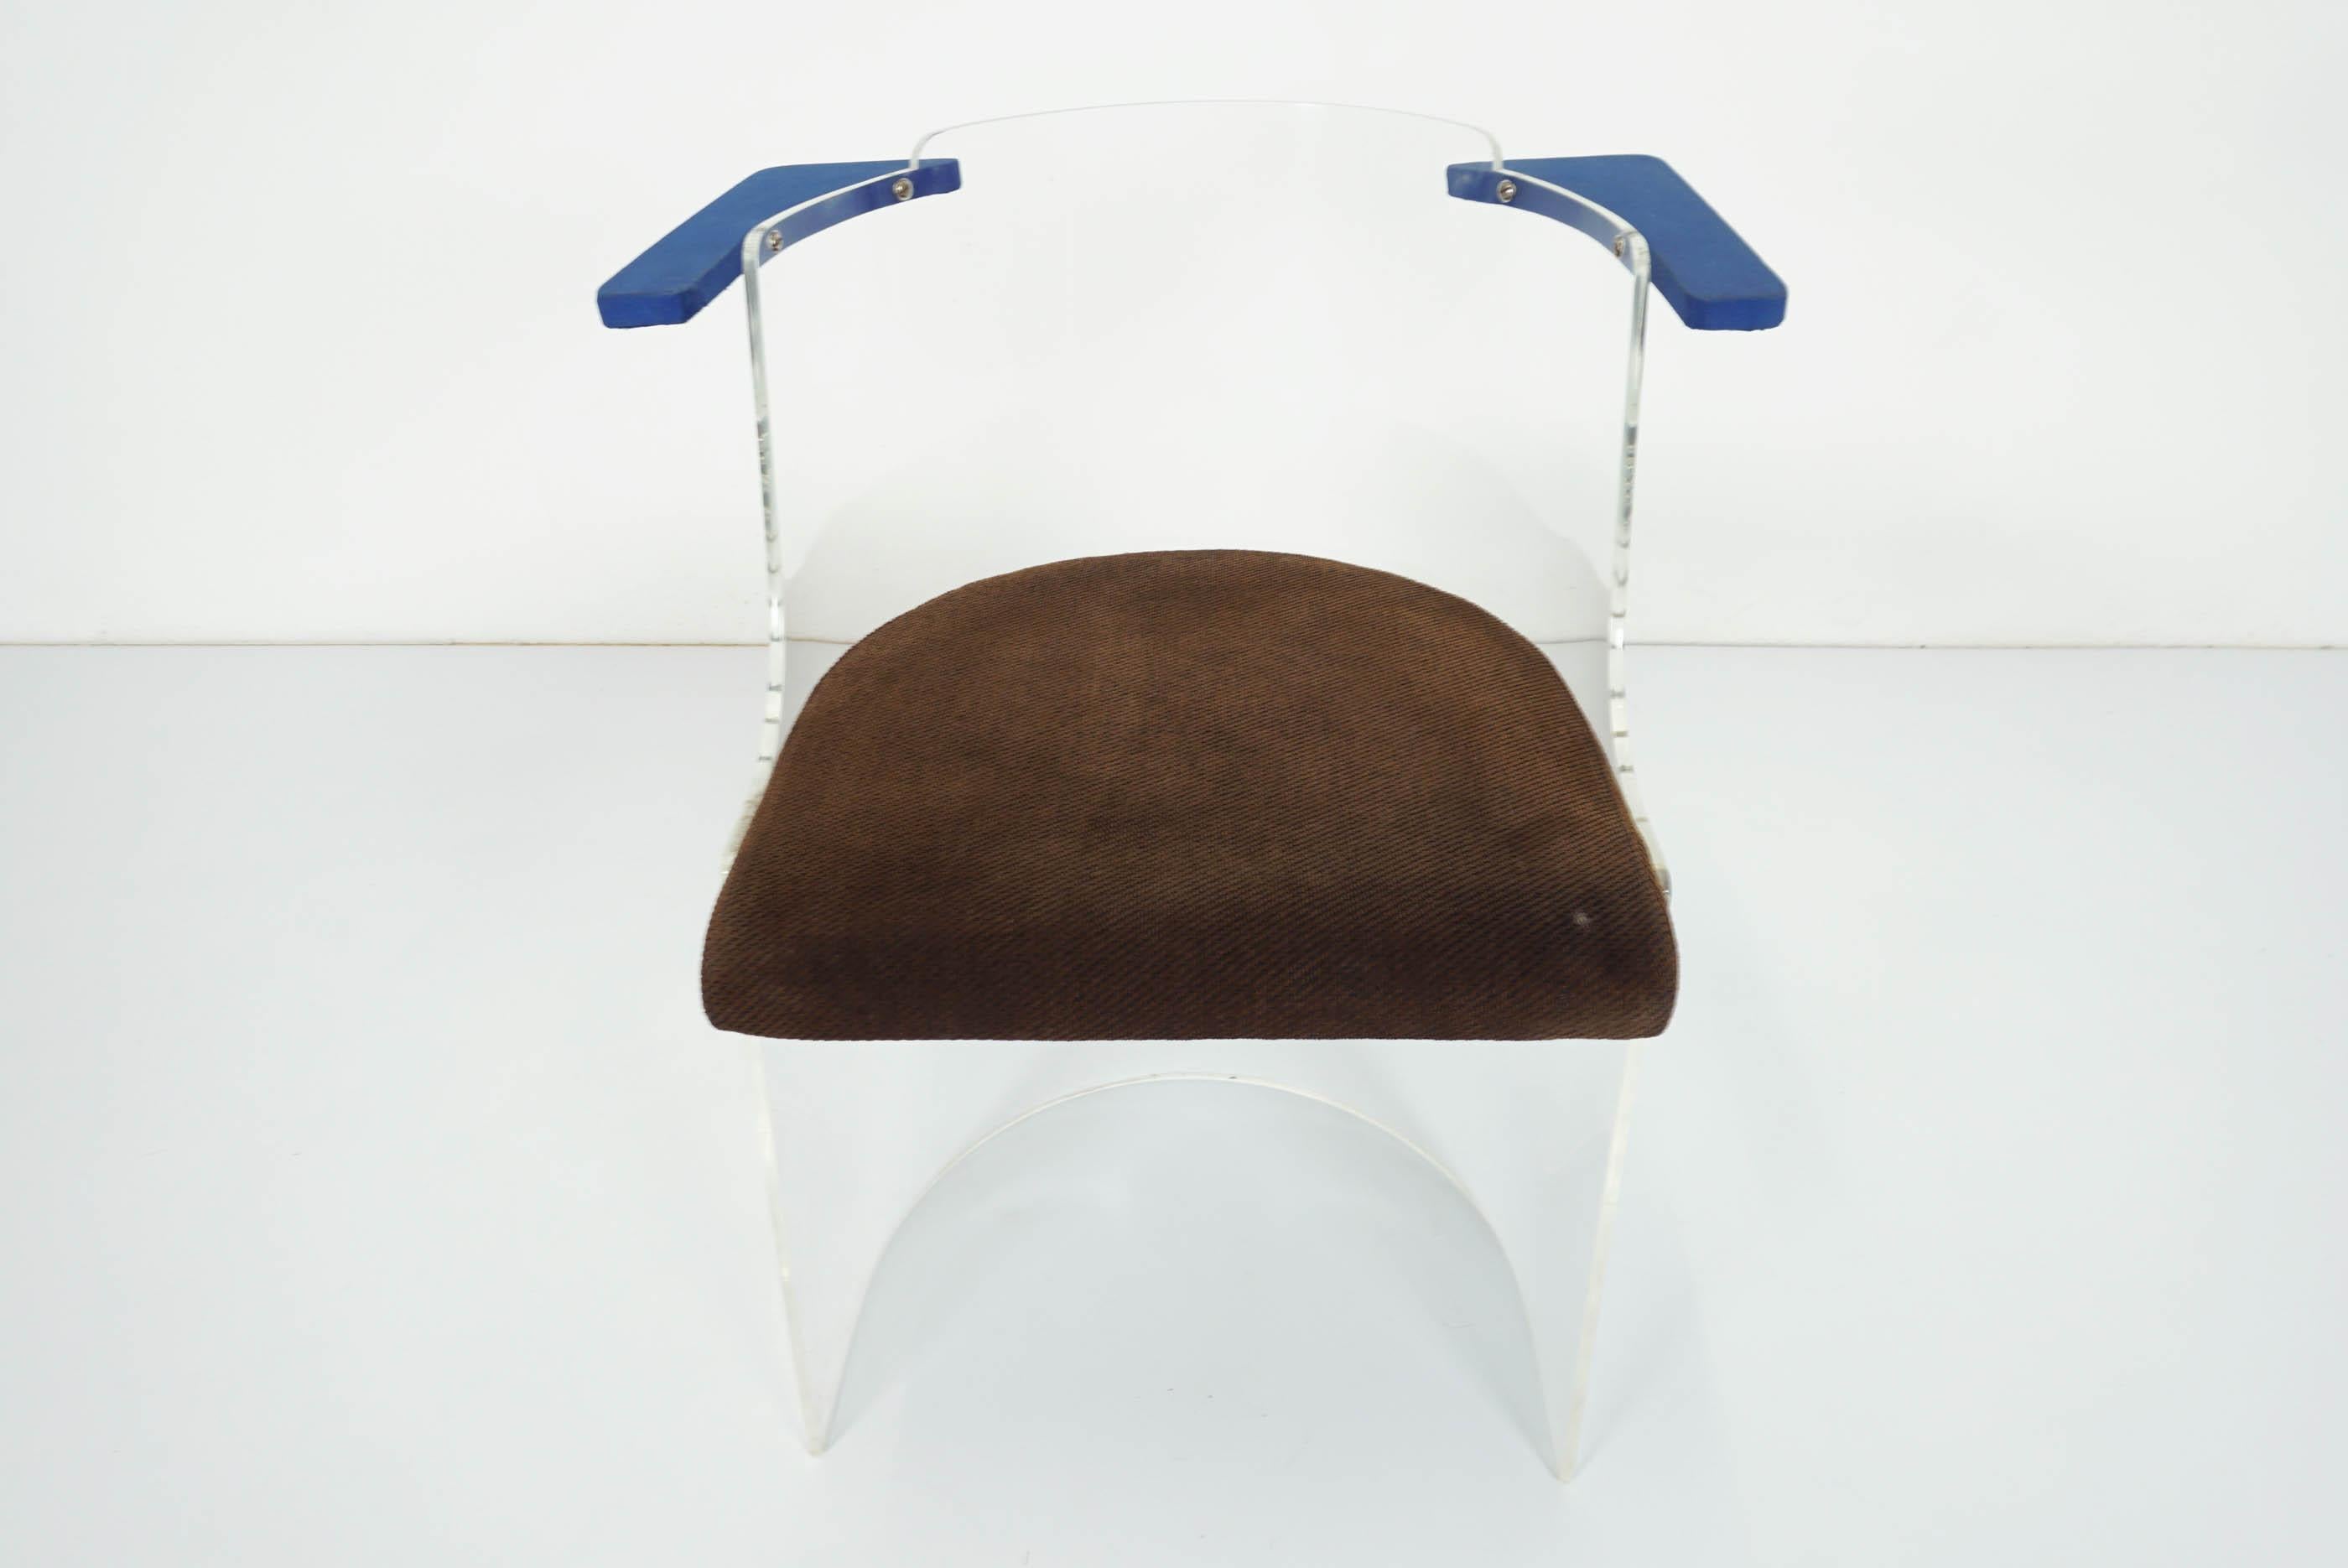 Mid-20th Century El Lissitzky 1930 Plexiglass Chair Made by Tecta D61 Chair Germany